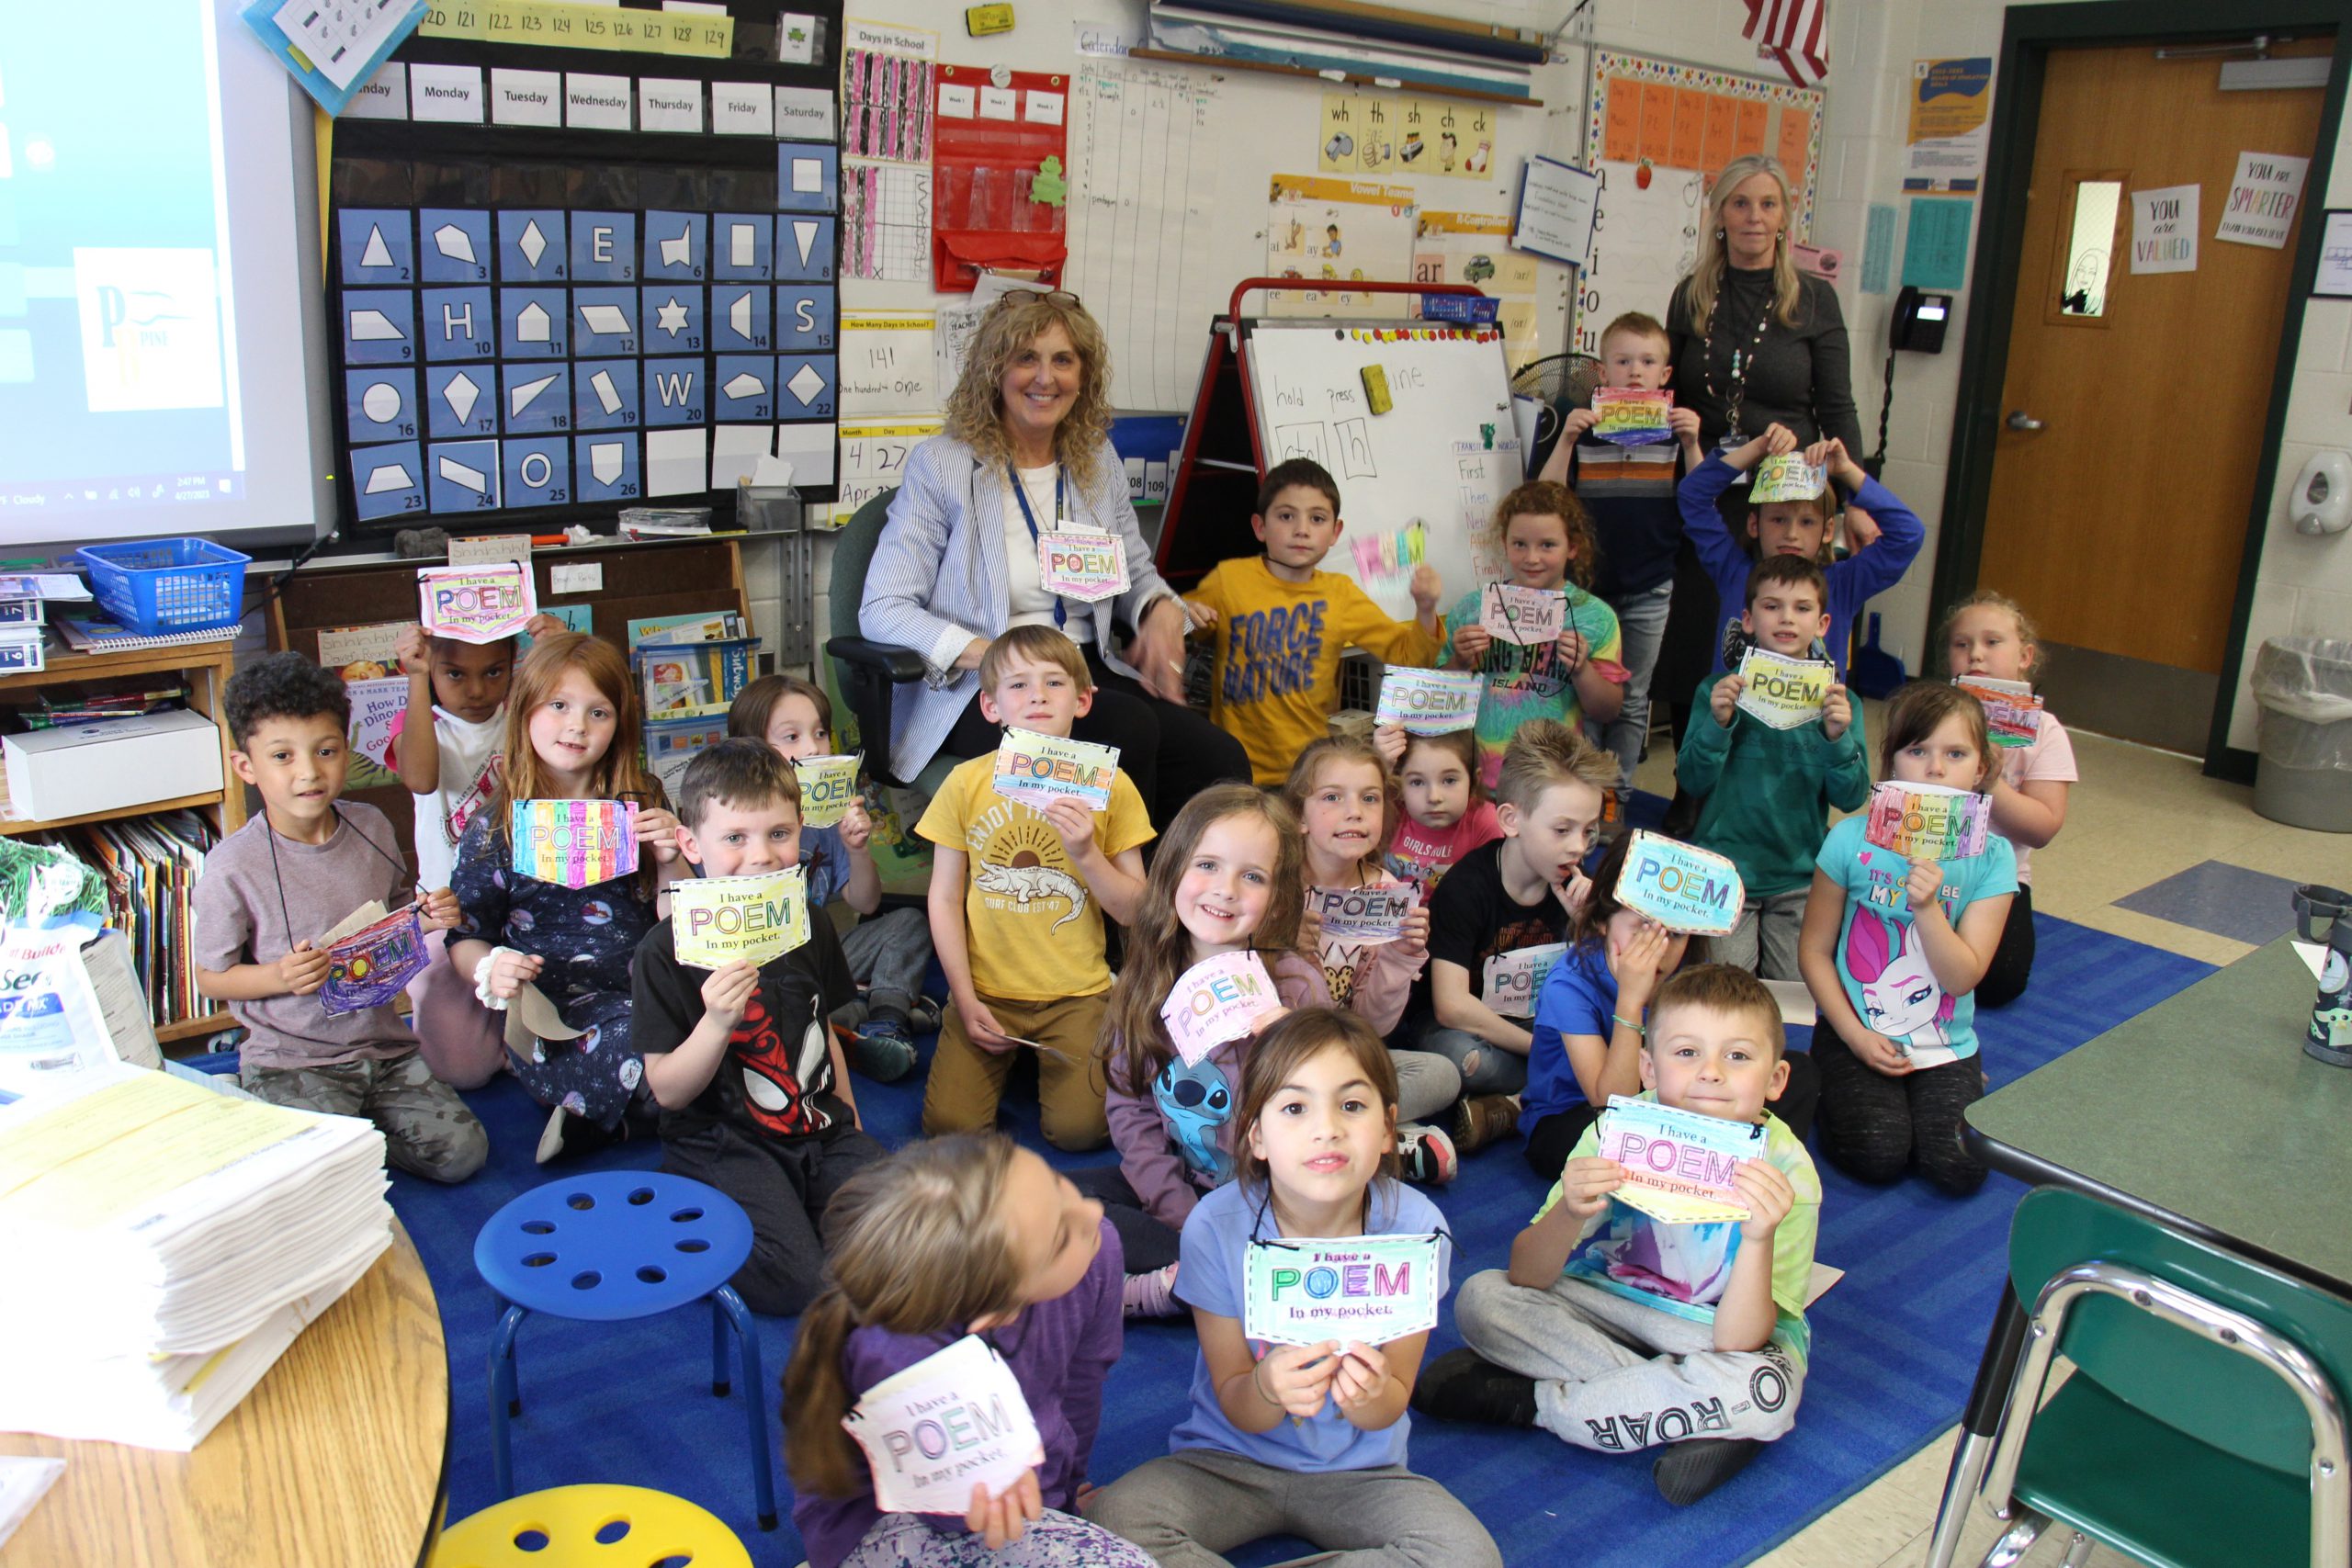 A class of first graders sitting on the floor hold up their pockets, which they made from paper. In the back are two women also with their pocket.